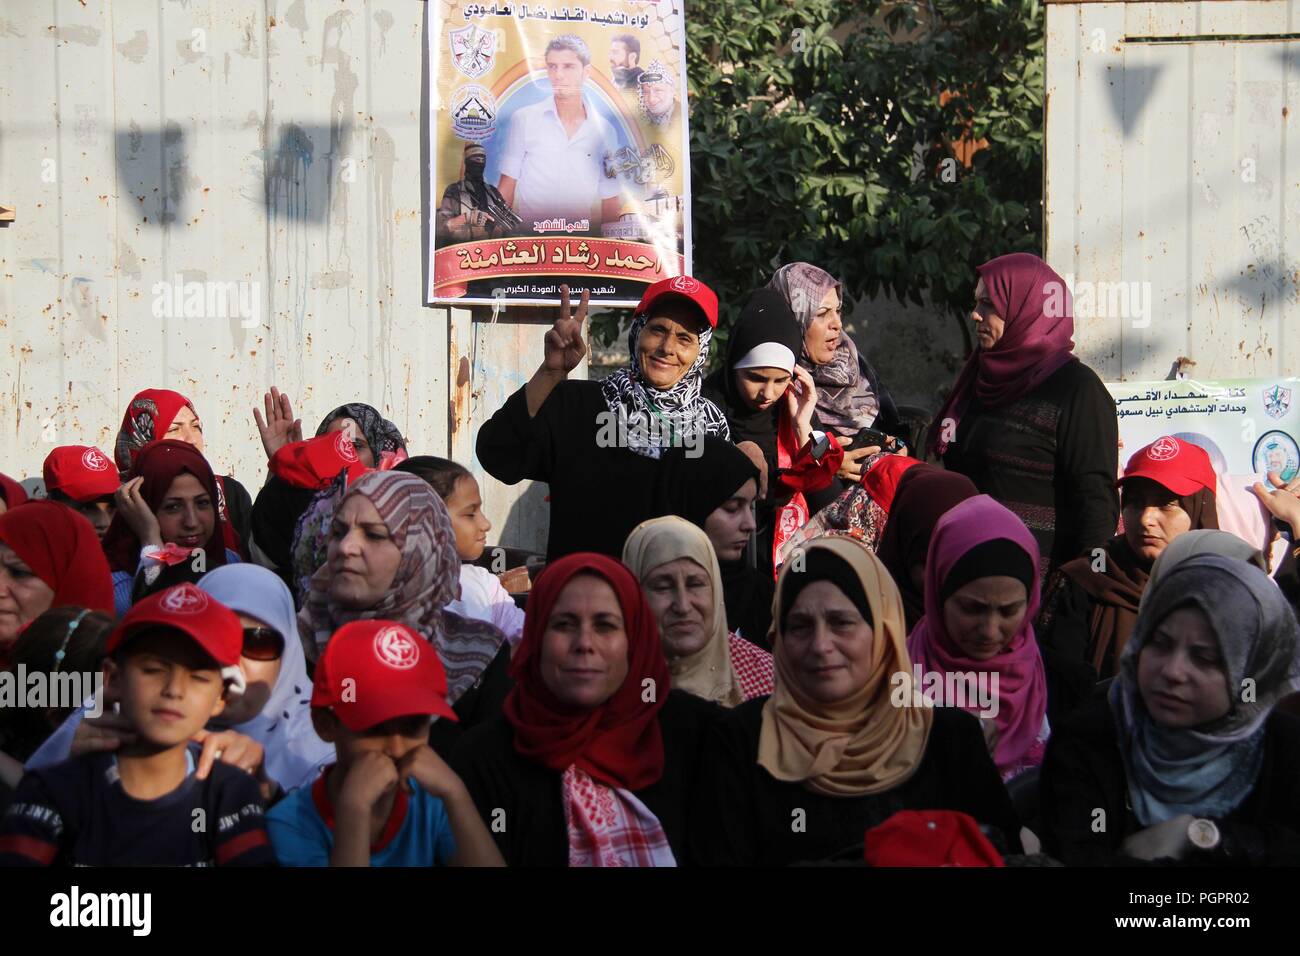 Jabalia, Gaza Strip, Palestinian Territory. 28th Aug, 2018. Palestinian supporters of the Popular Front for the Liberation of Palestine (PFLP) take part in a rally marking the The 17th anniversary of the killing of Abu Ali Mustafa, leader of (PFLP), in Jabalia in the northern Gaza Stirp on August 28, 2018 Credit: Mahmoud Ajour/APA Images/ZUMA Wire/Alamy Live News Stock Photo